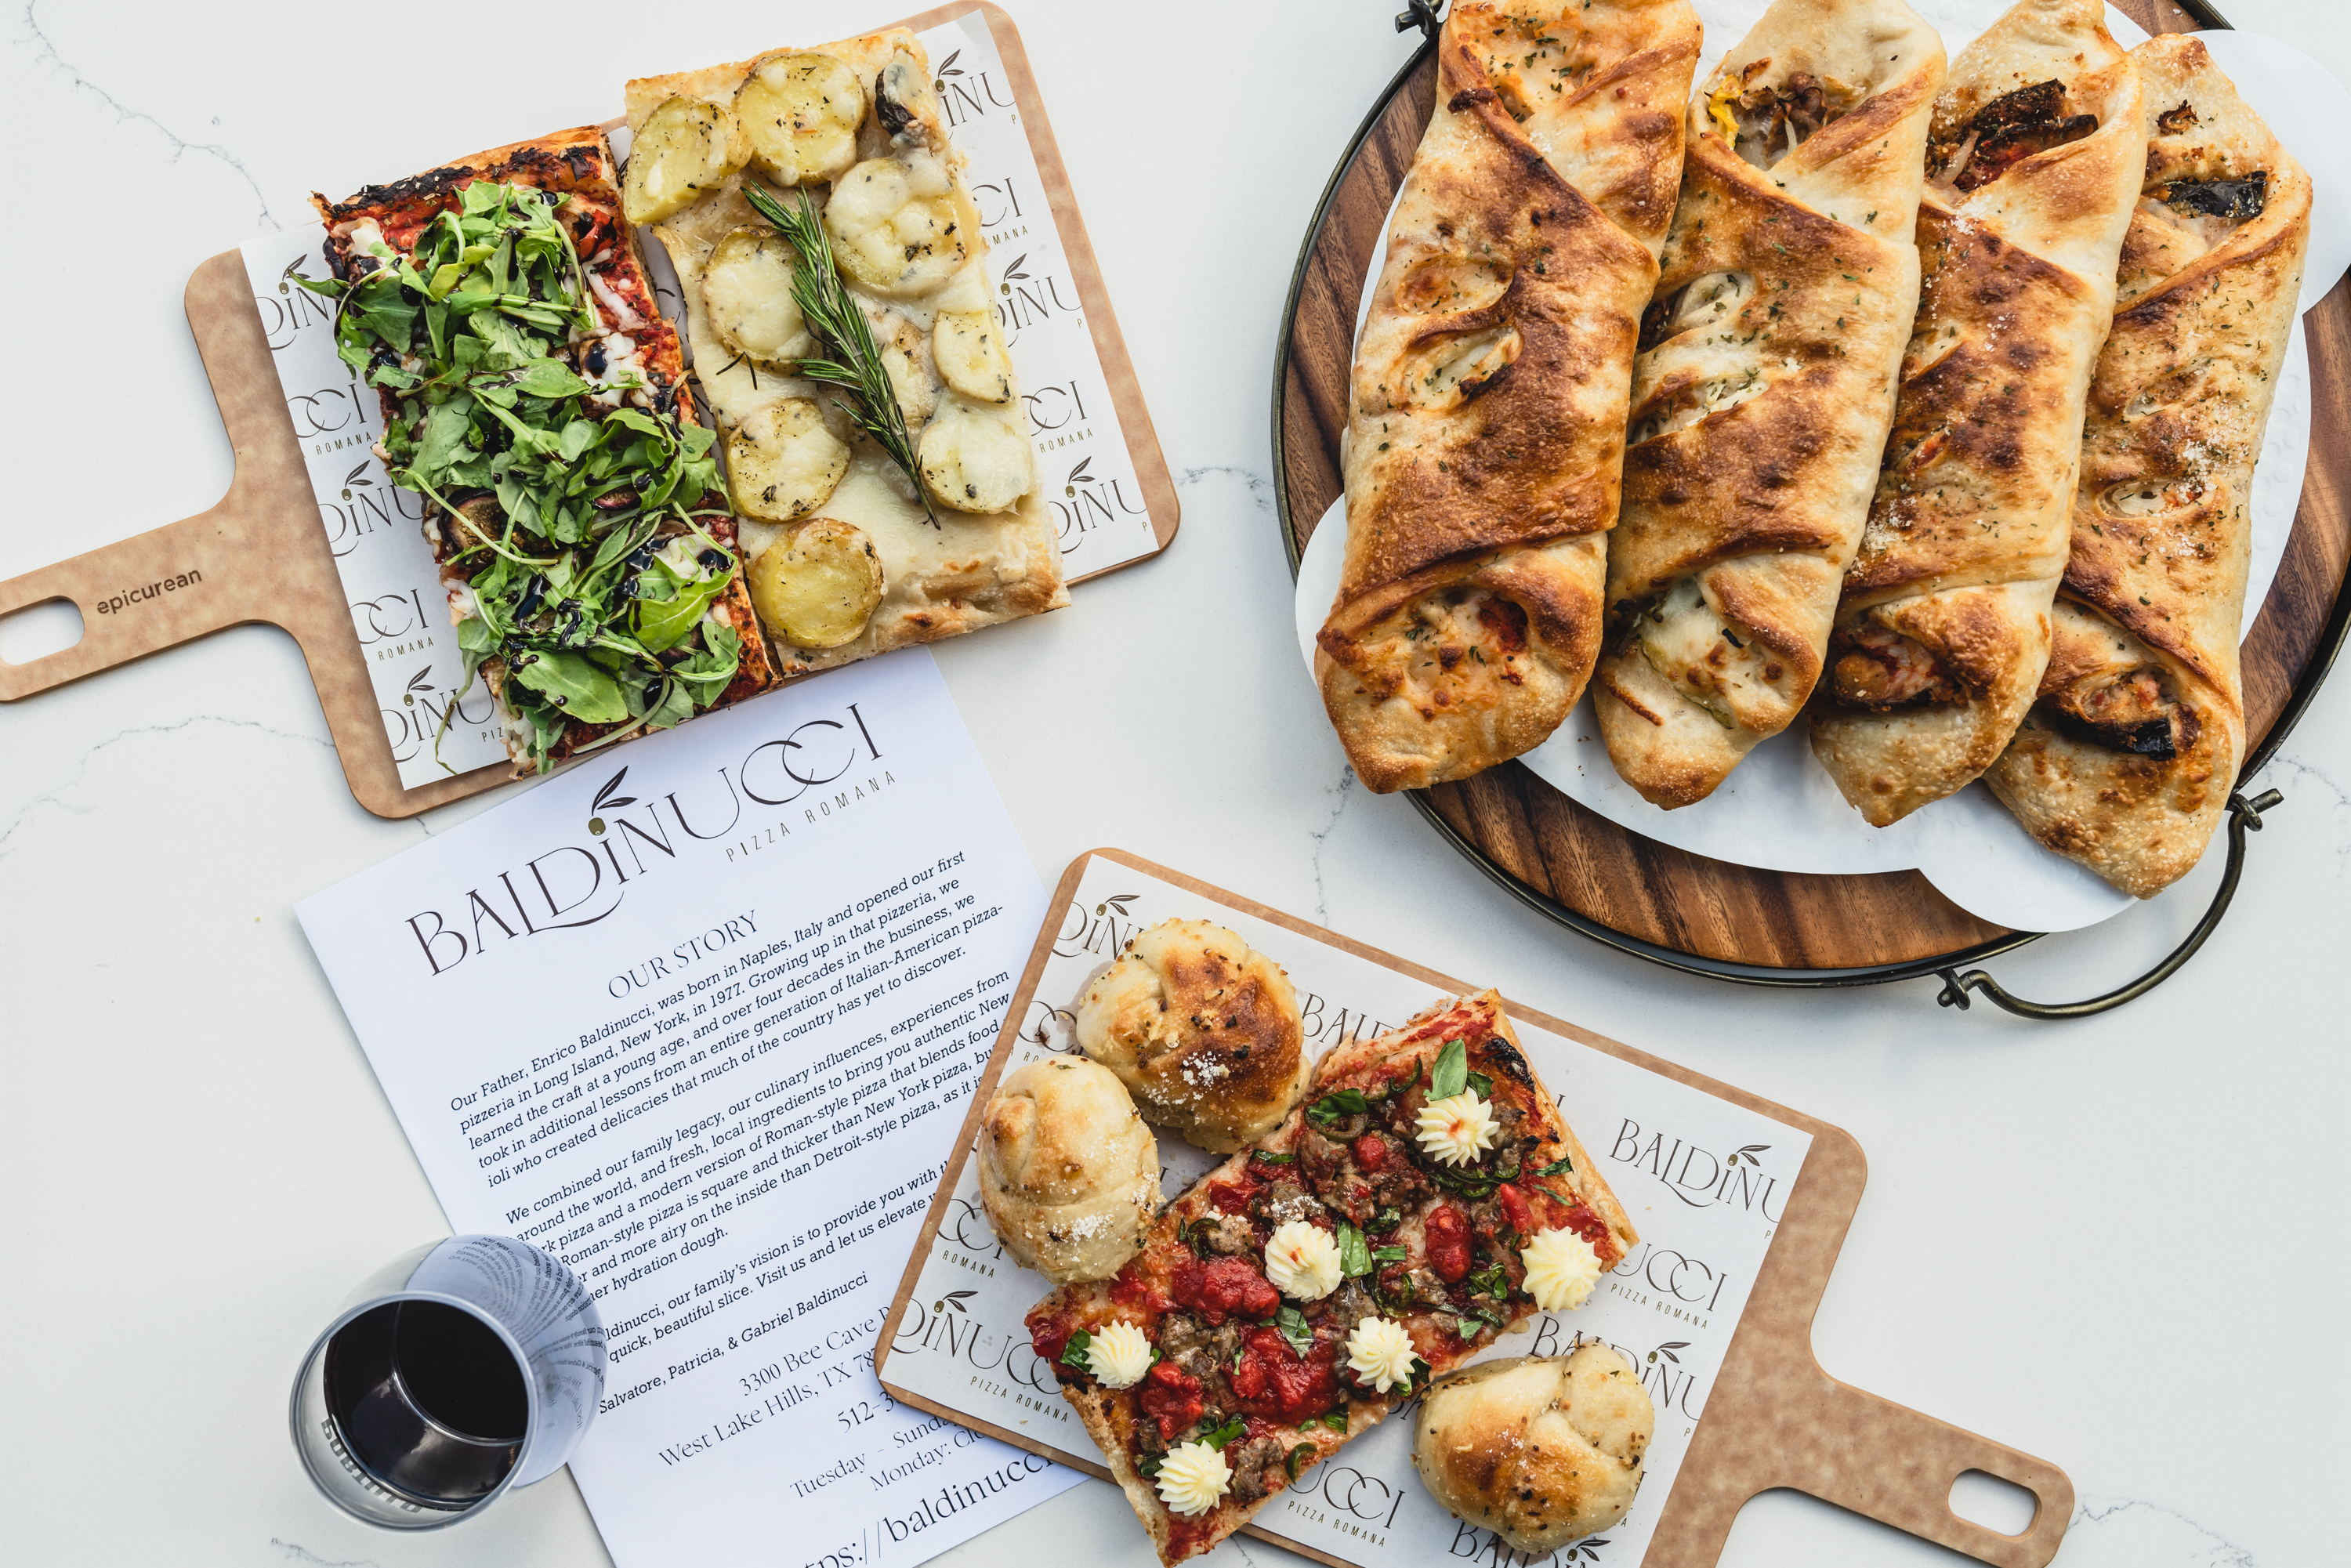 Wooden boards with two kinds of thin-crust pizza, rolled involtini, and a piece of pizza with garlic knots, with the baldinucci menu in the middle and a glass of water